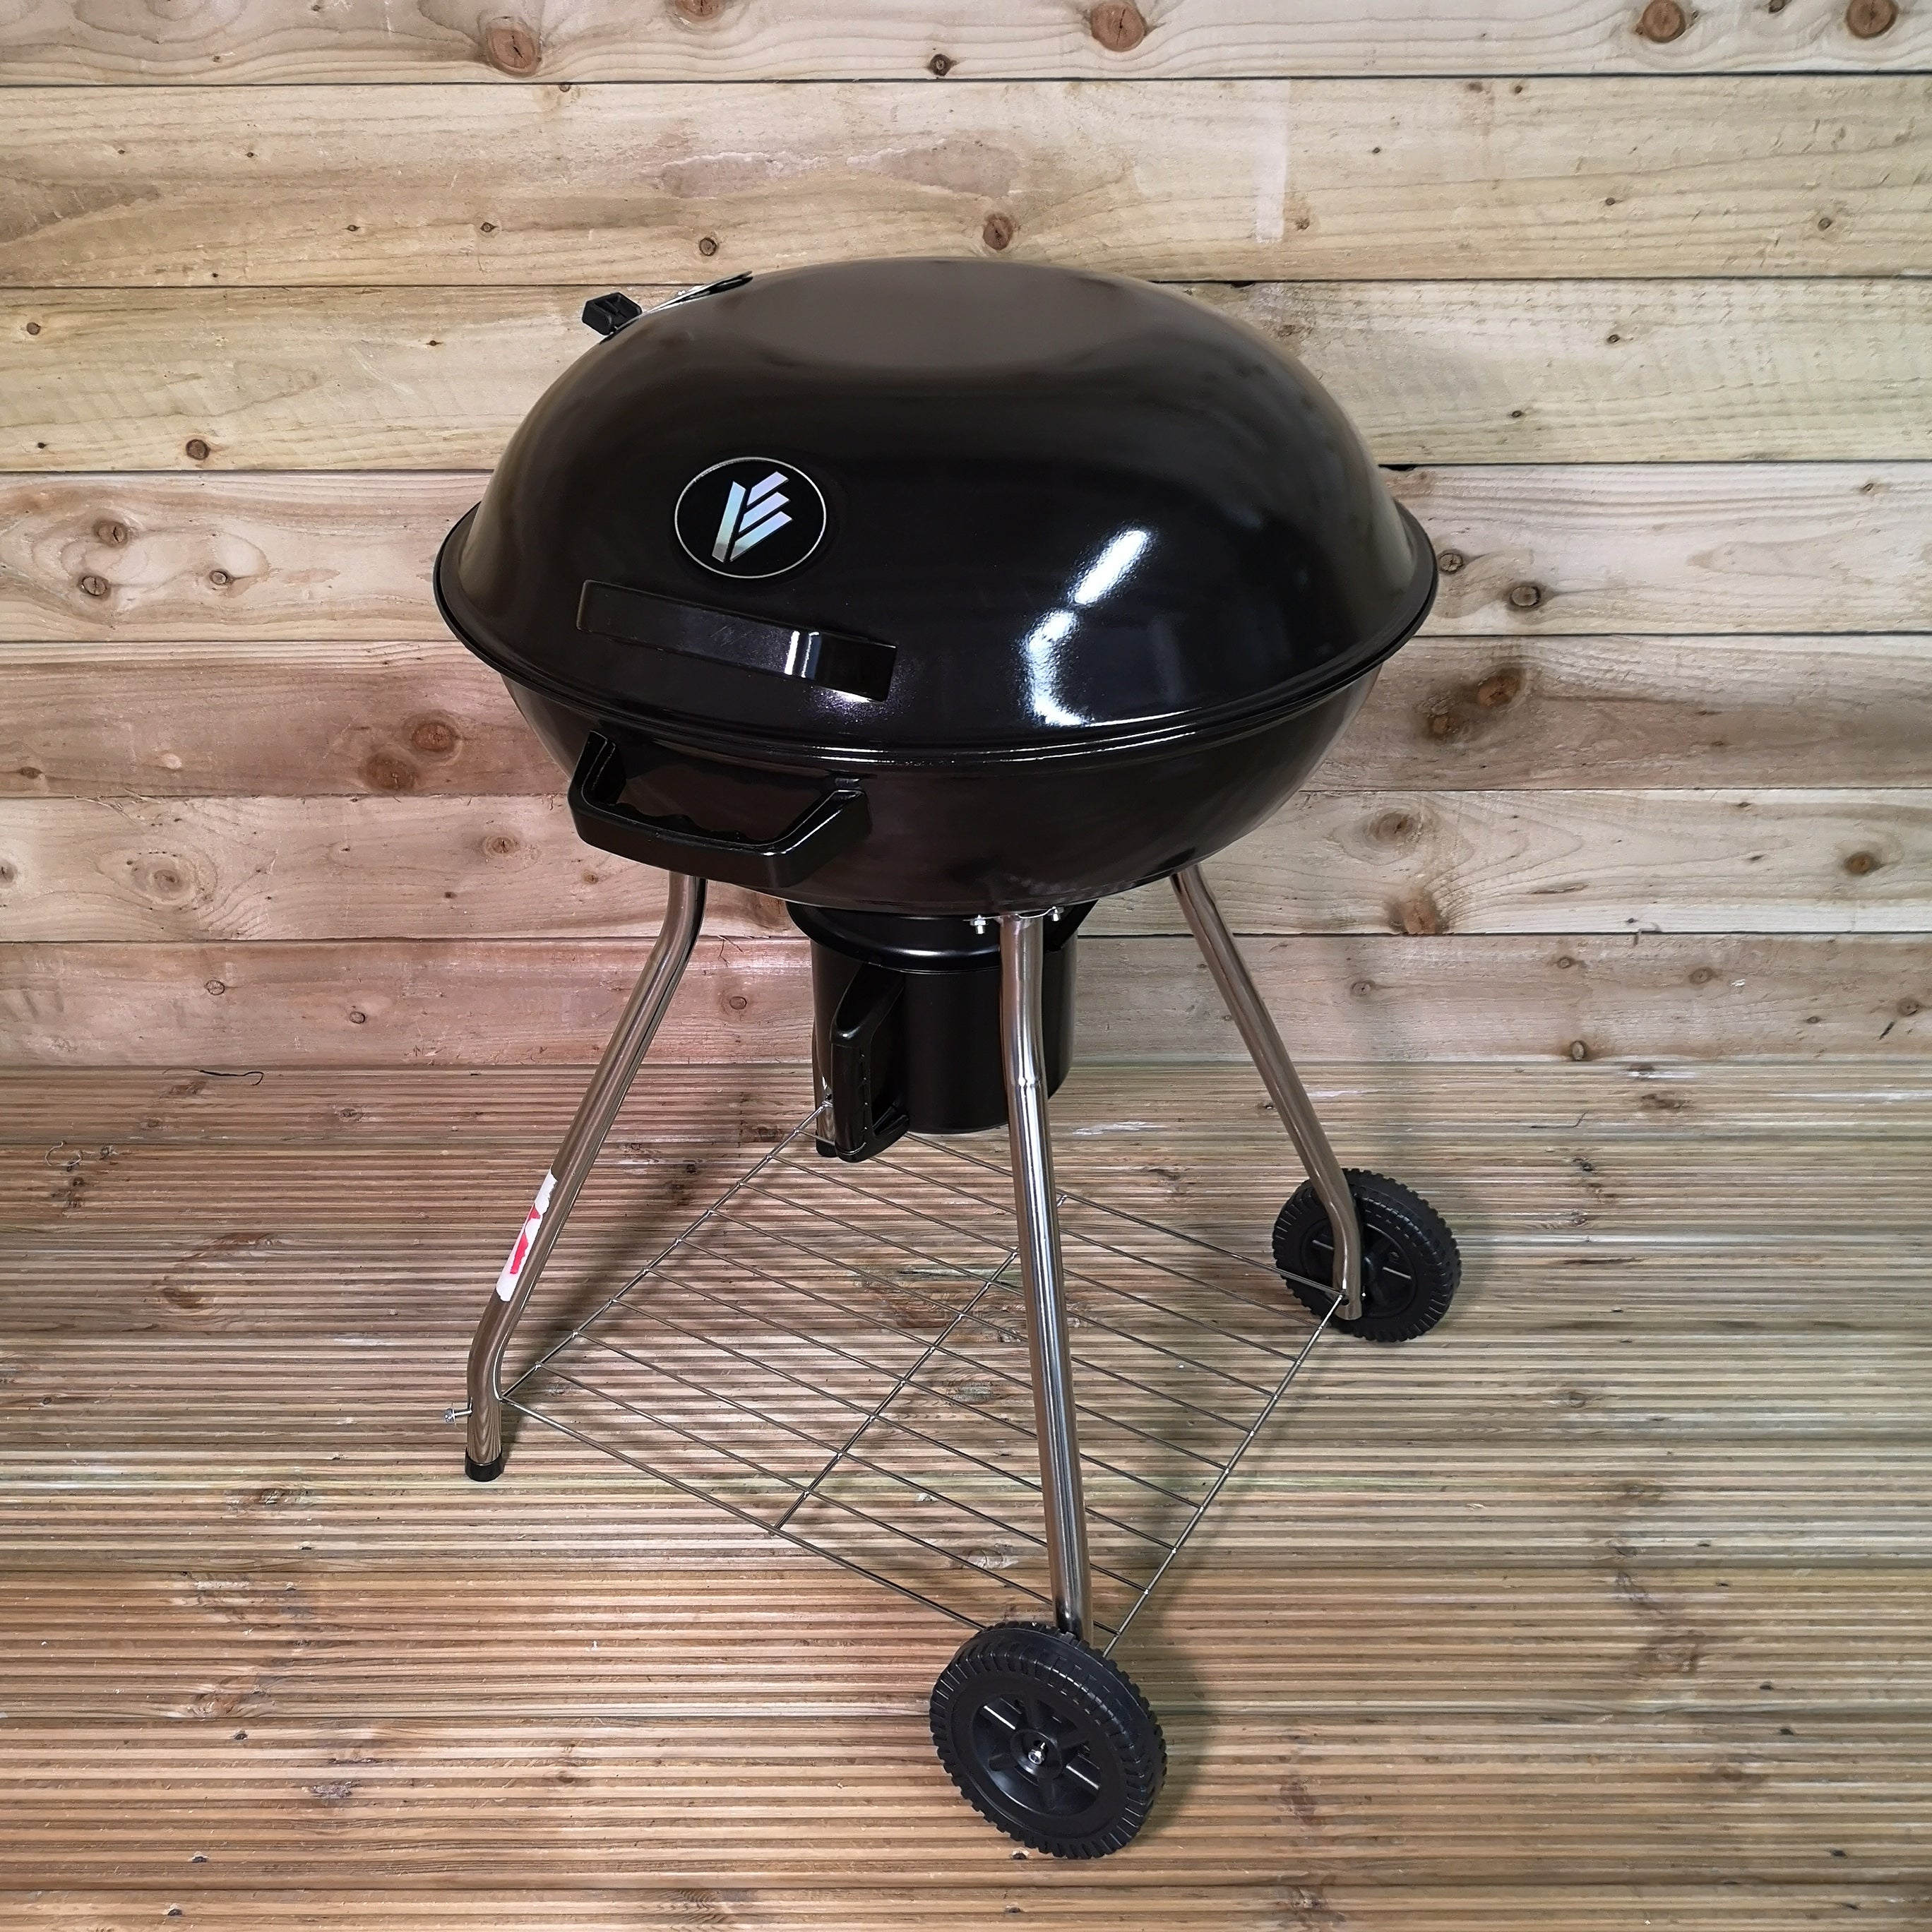 ⌀56cm Outdoor Garden Round Charcoal BBQ Barbecue on Wheels